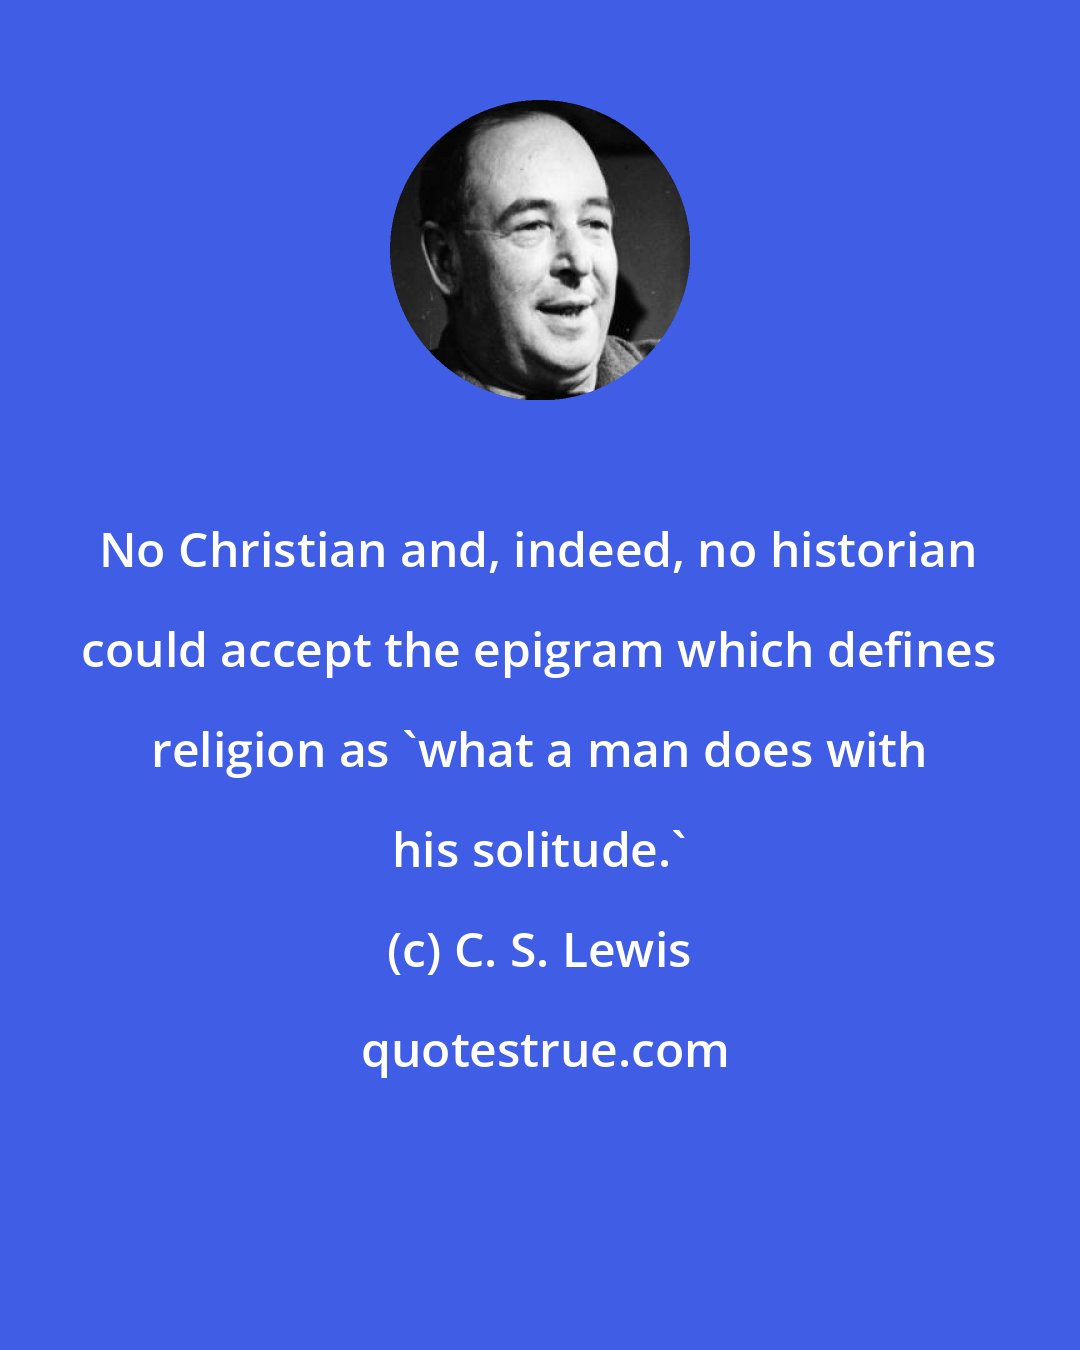 C. S. Lewis: No Christian and, indeed, no historian could accept the epigram which defines religion as 'what a man does with his solitude.'